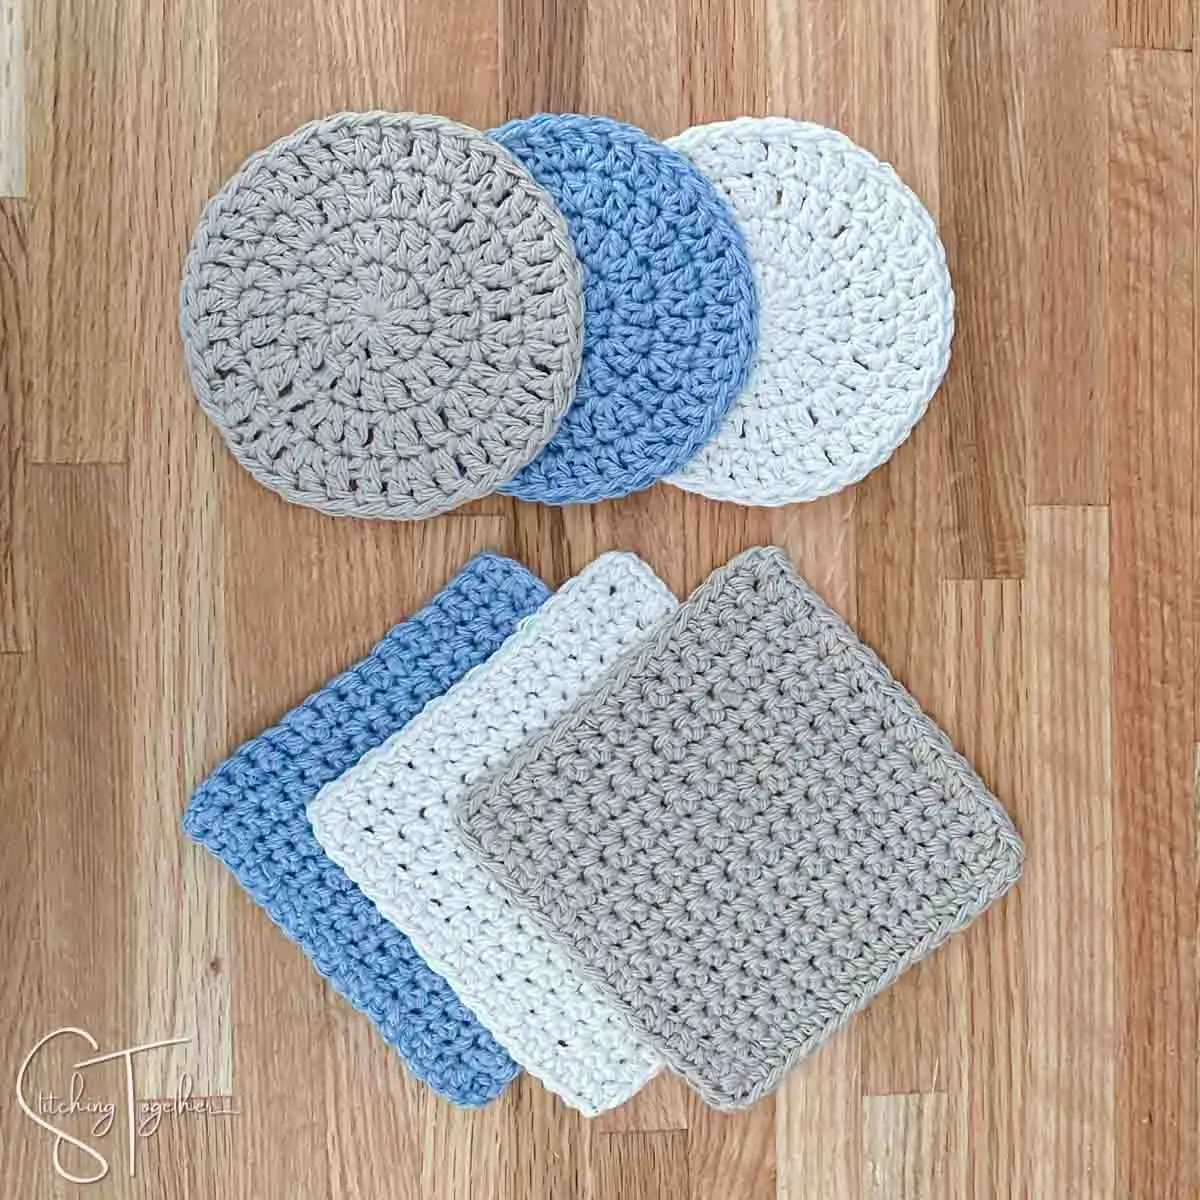 How to Crochet a Coaster - Ultimate Guide